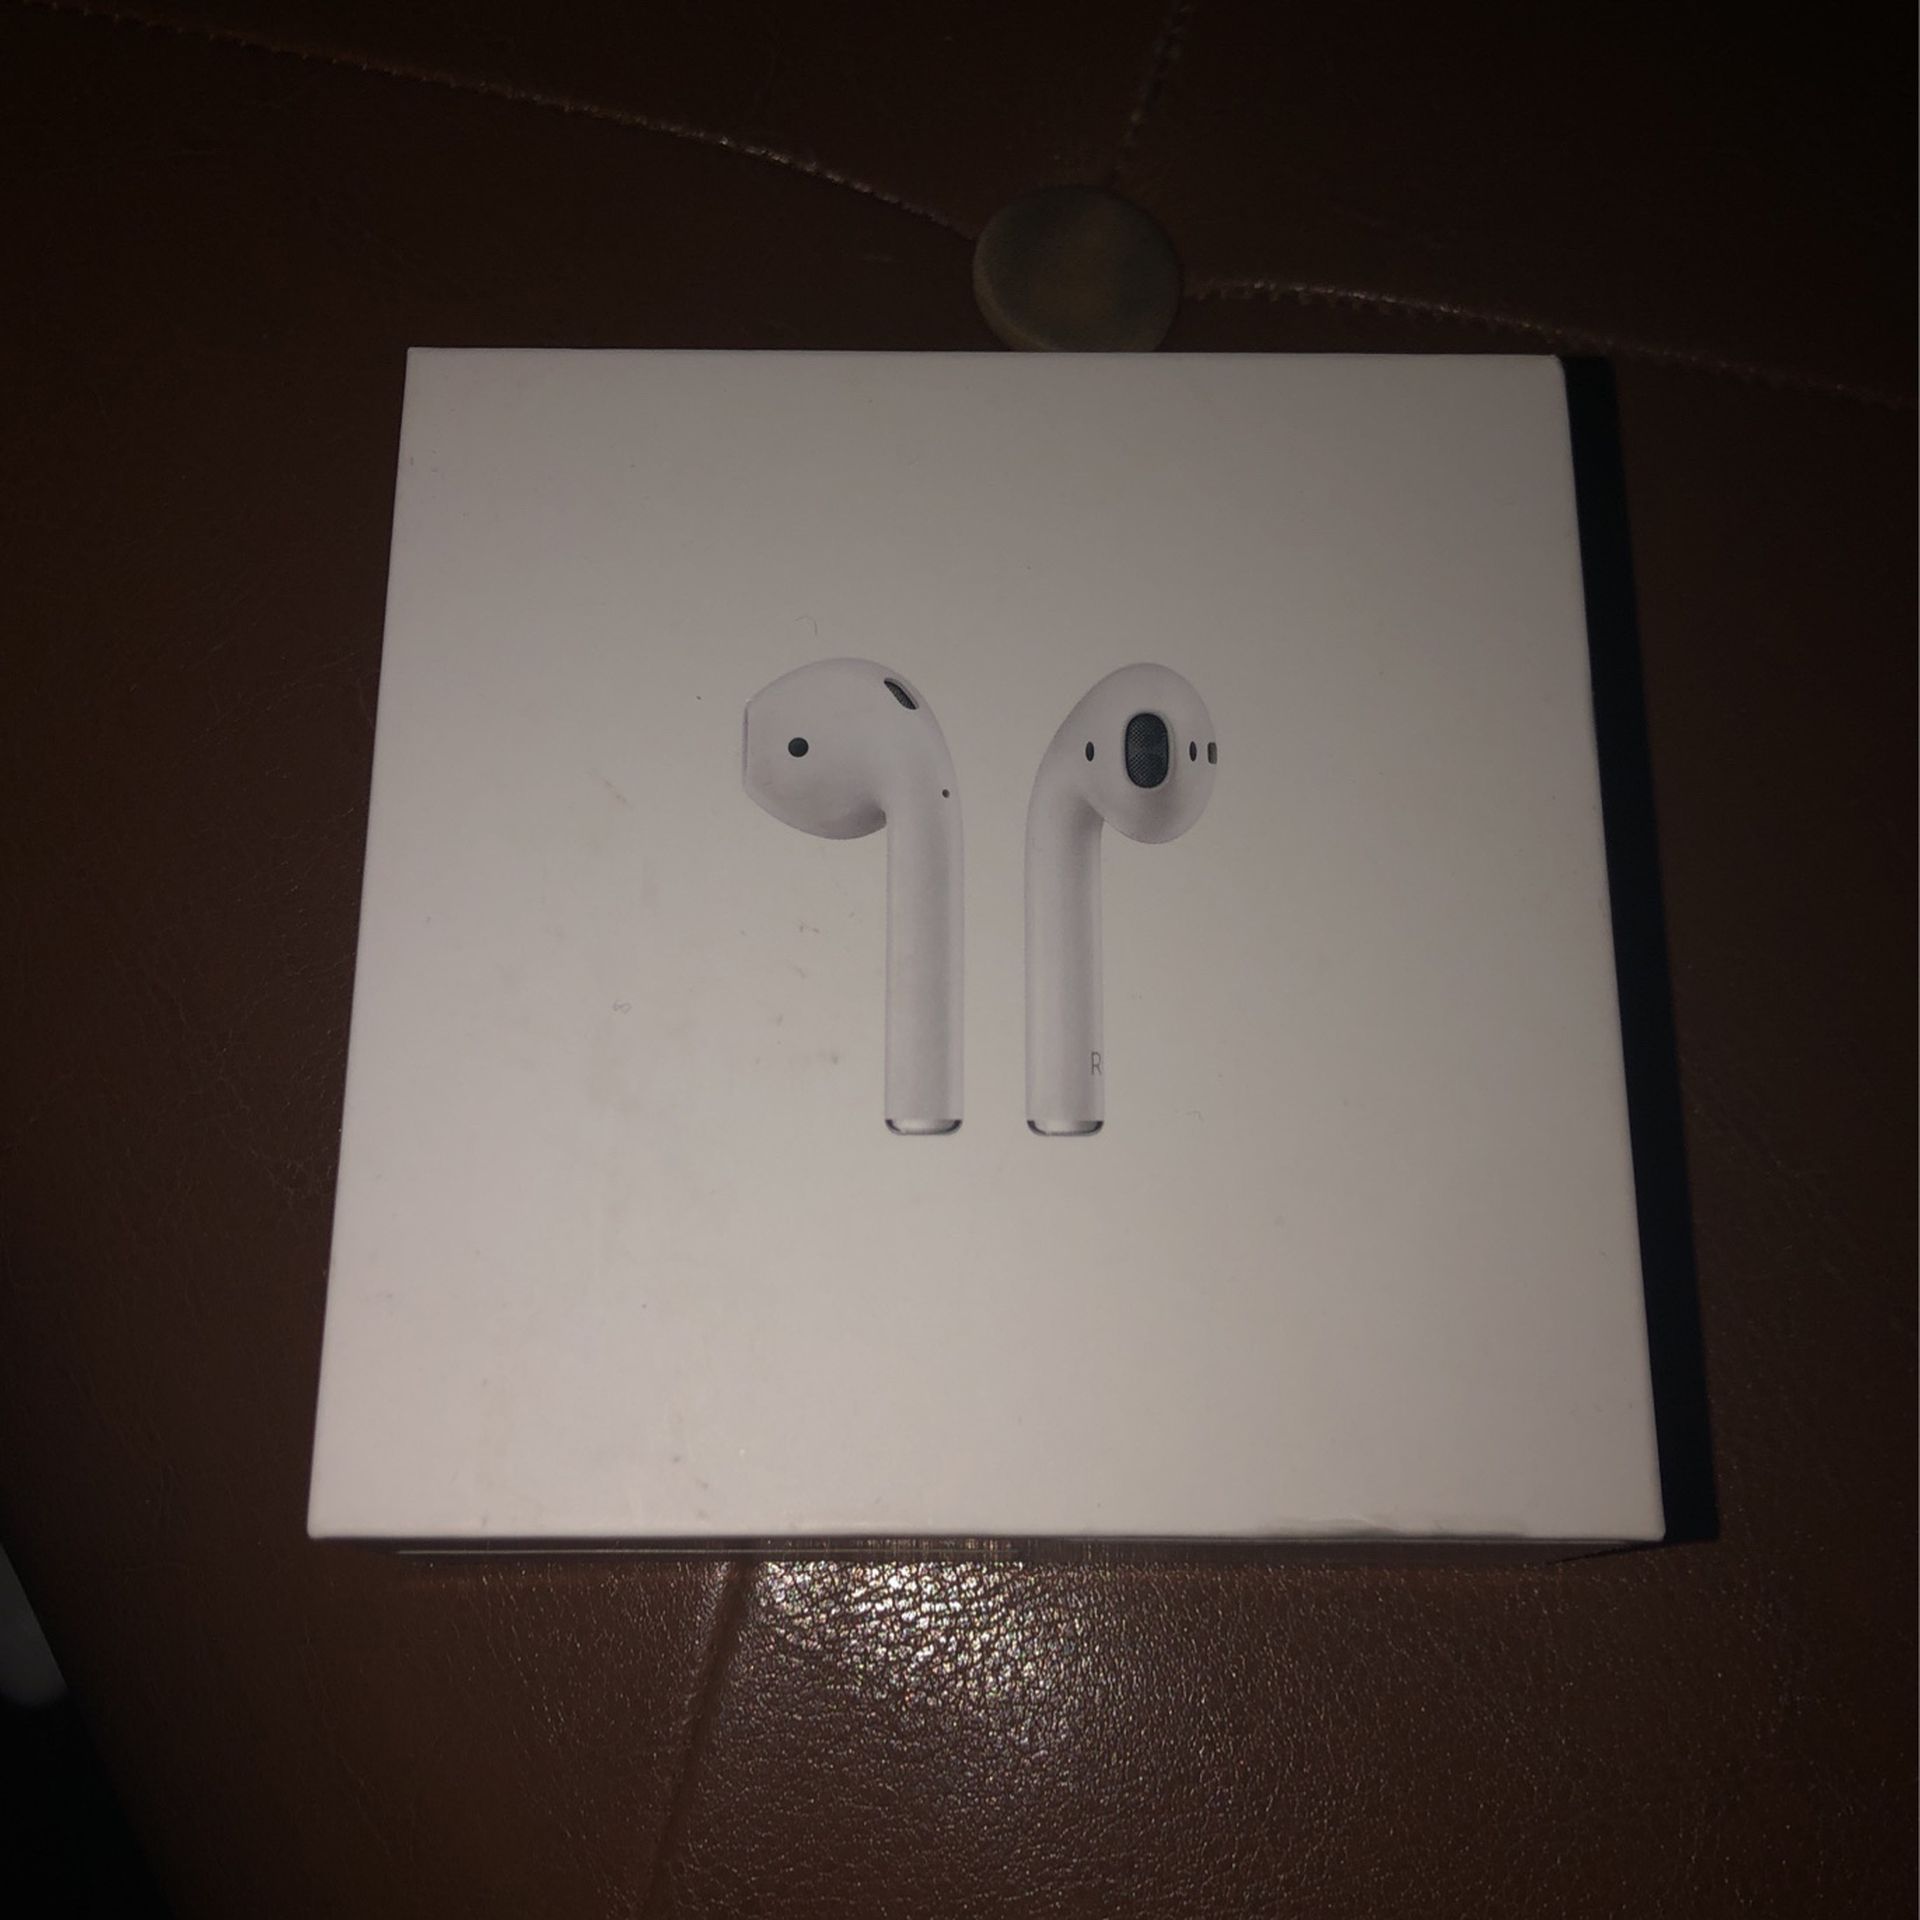 Air Pods 1st Generation In The Box With AirPods